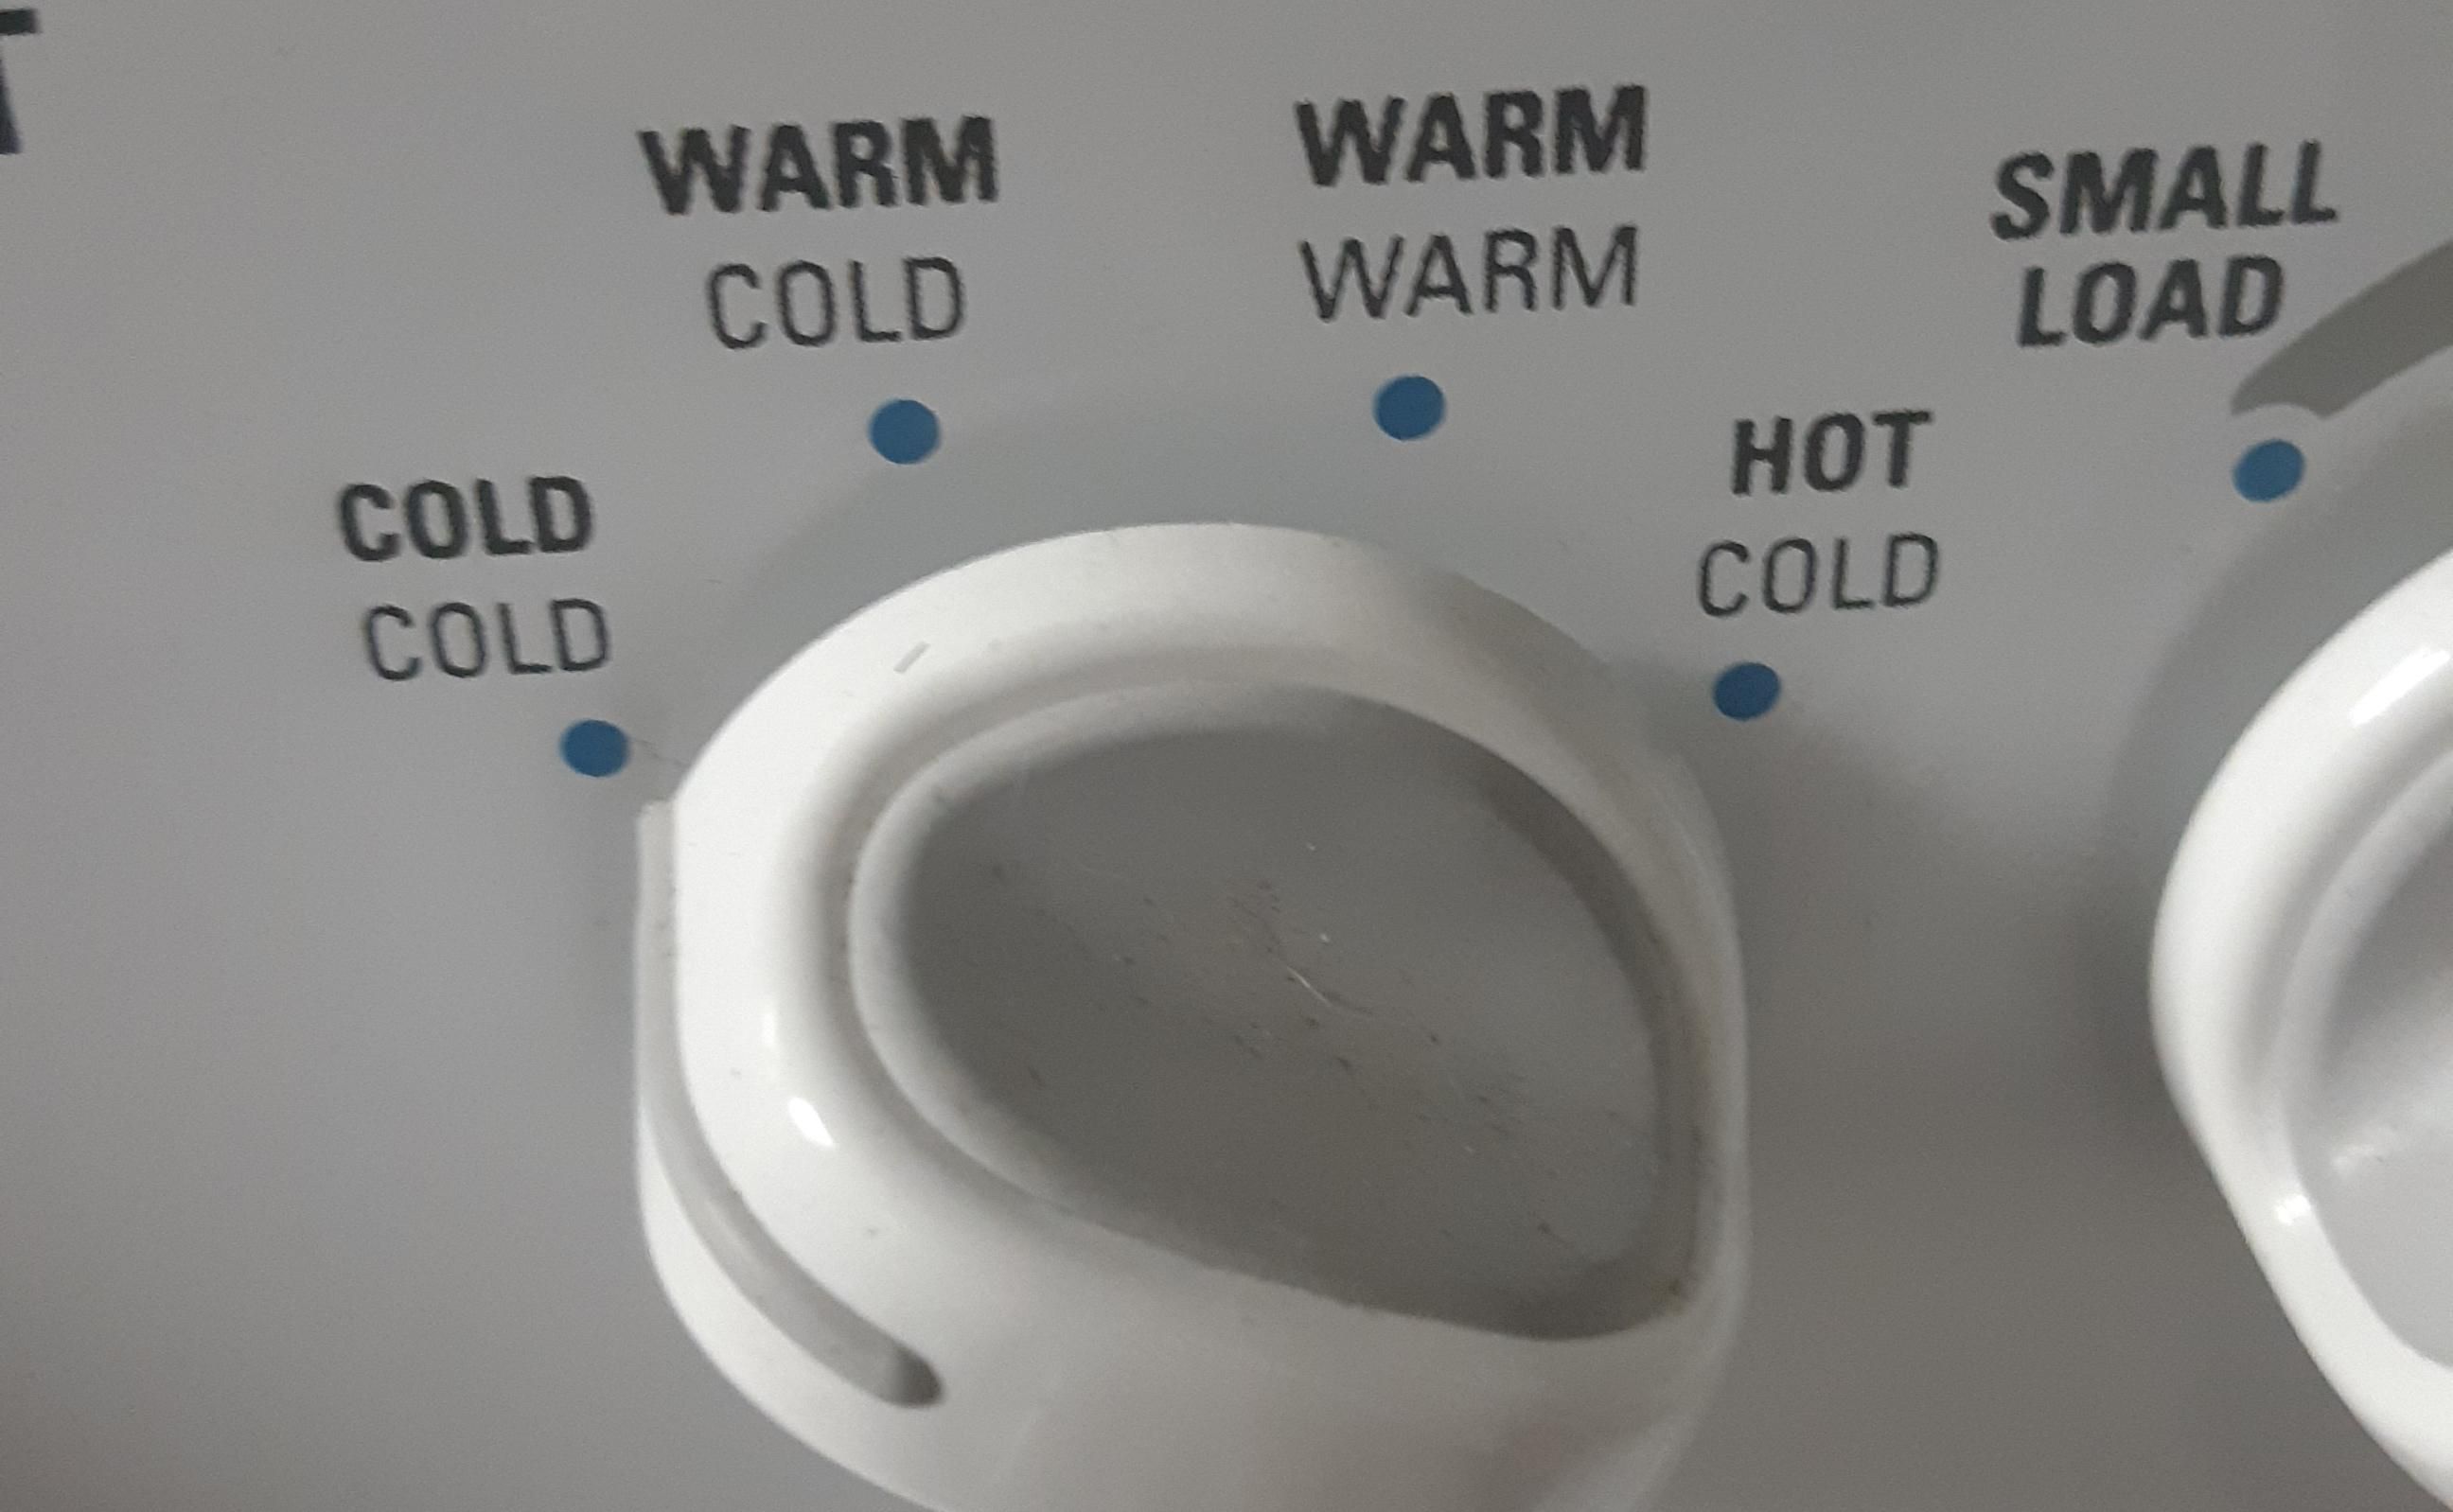 Wife asked me toss the sheets in the washer and set it to the hottest temp. I've been staring at my options for 2 hours.... help me.